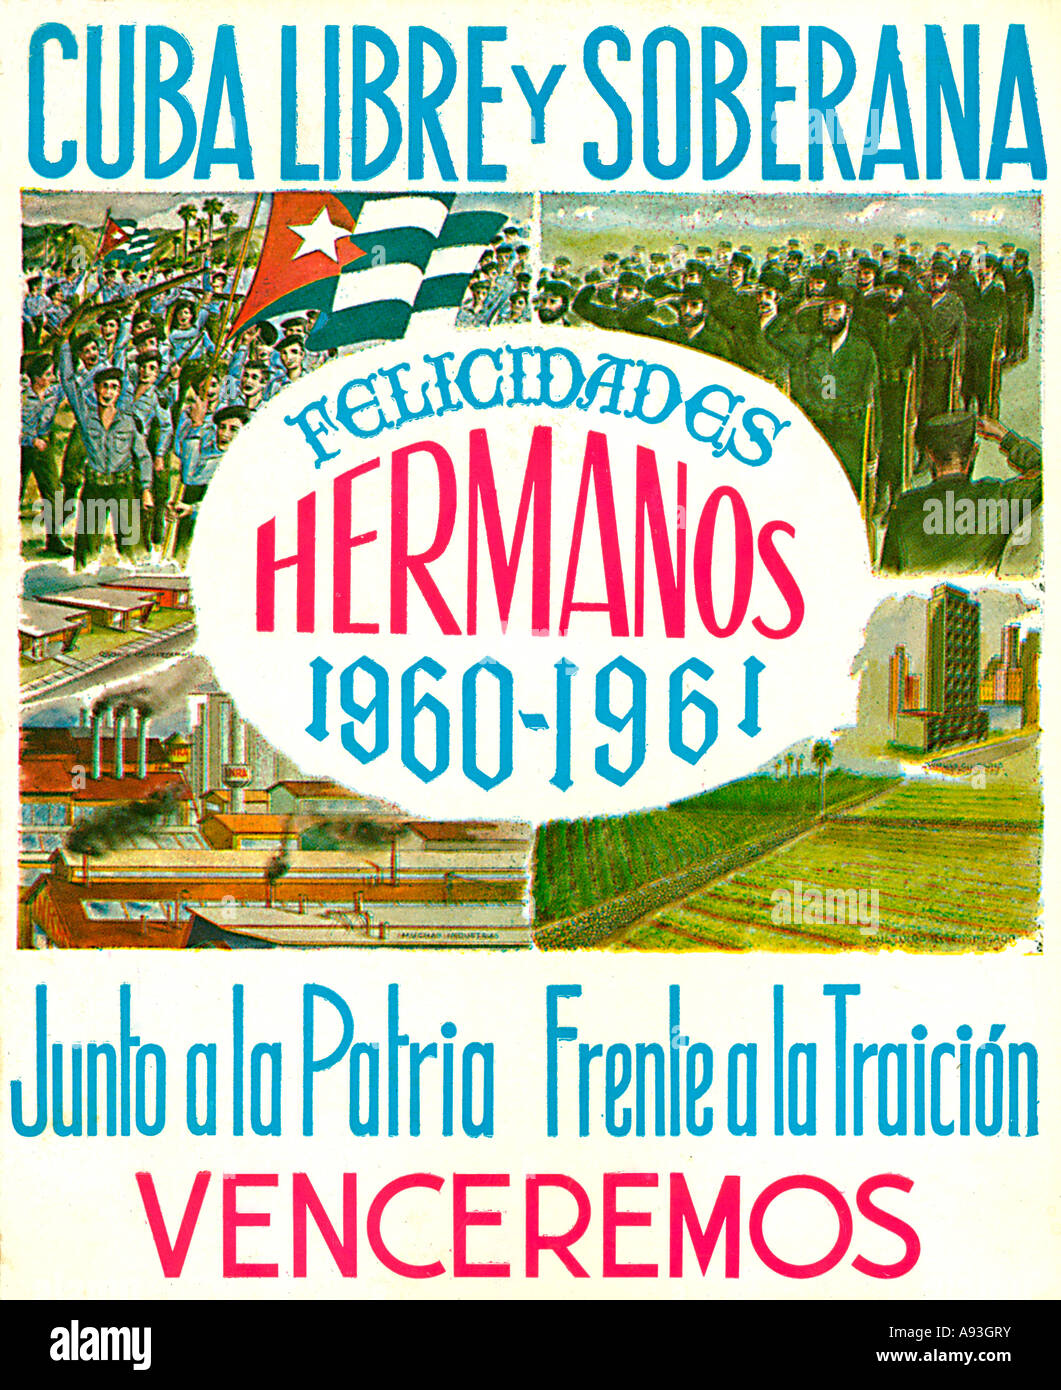 Cuba Libre 1960 Cuban political poster celebrating the revolution and the workers who made it possible Stock Photo